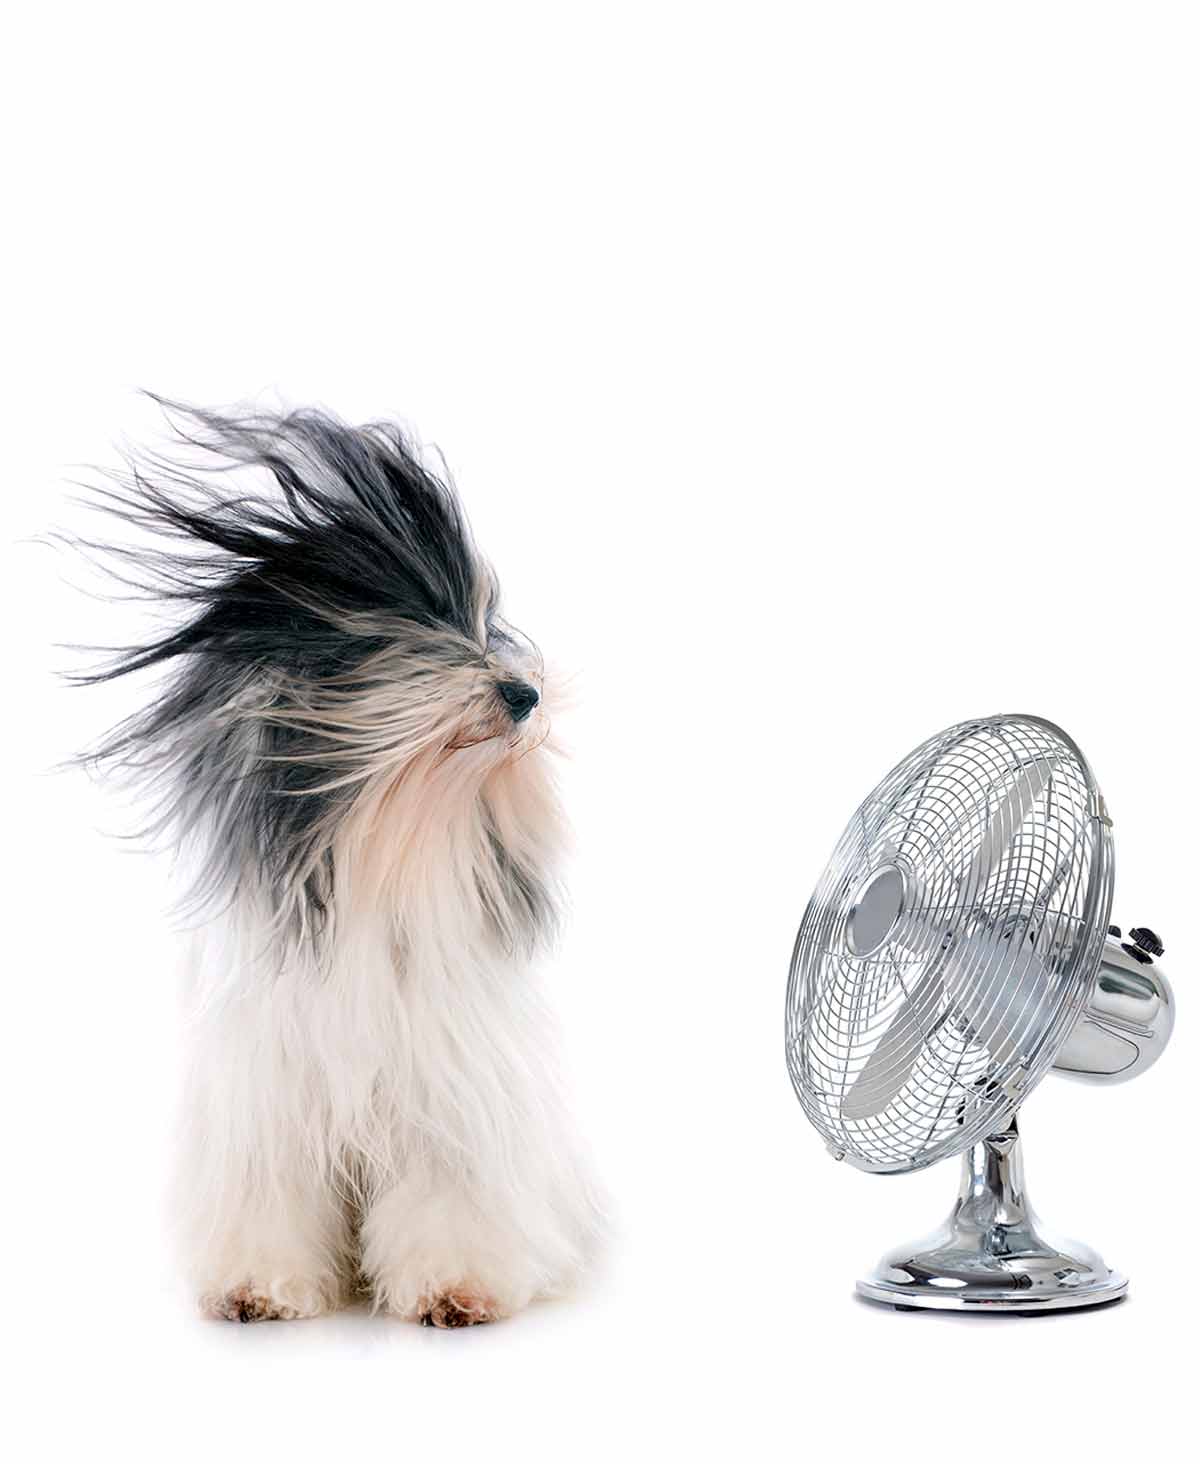 White and black long haired dog with hair being blown by a fan.